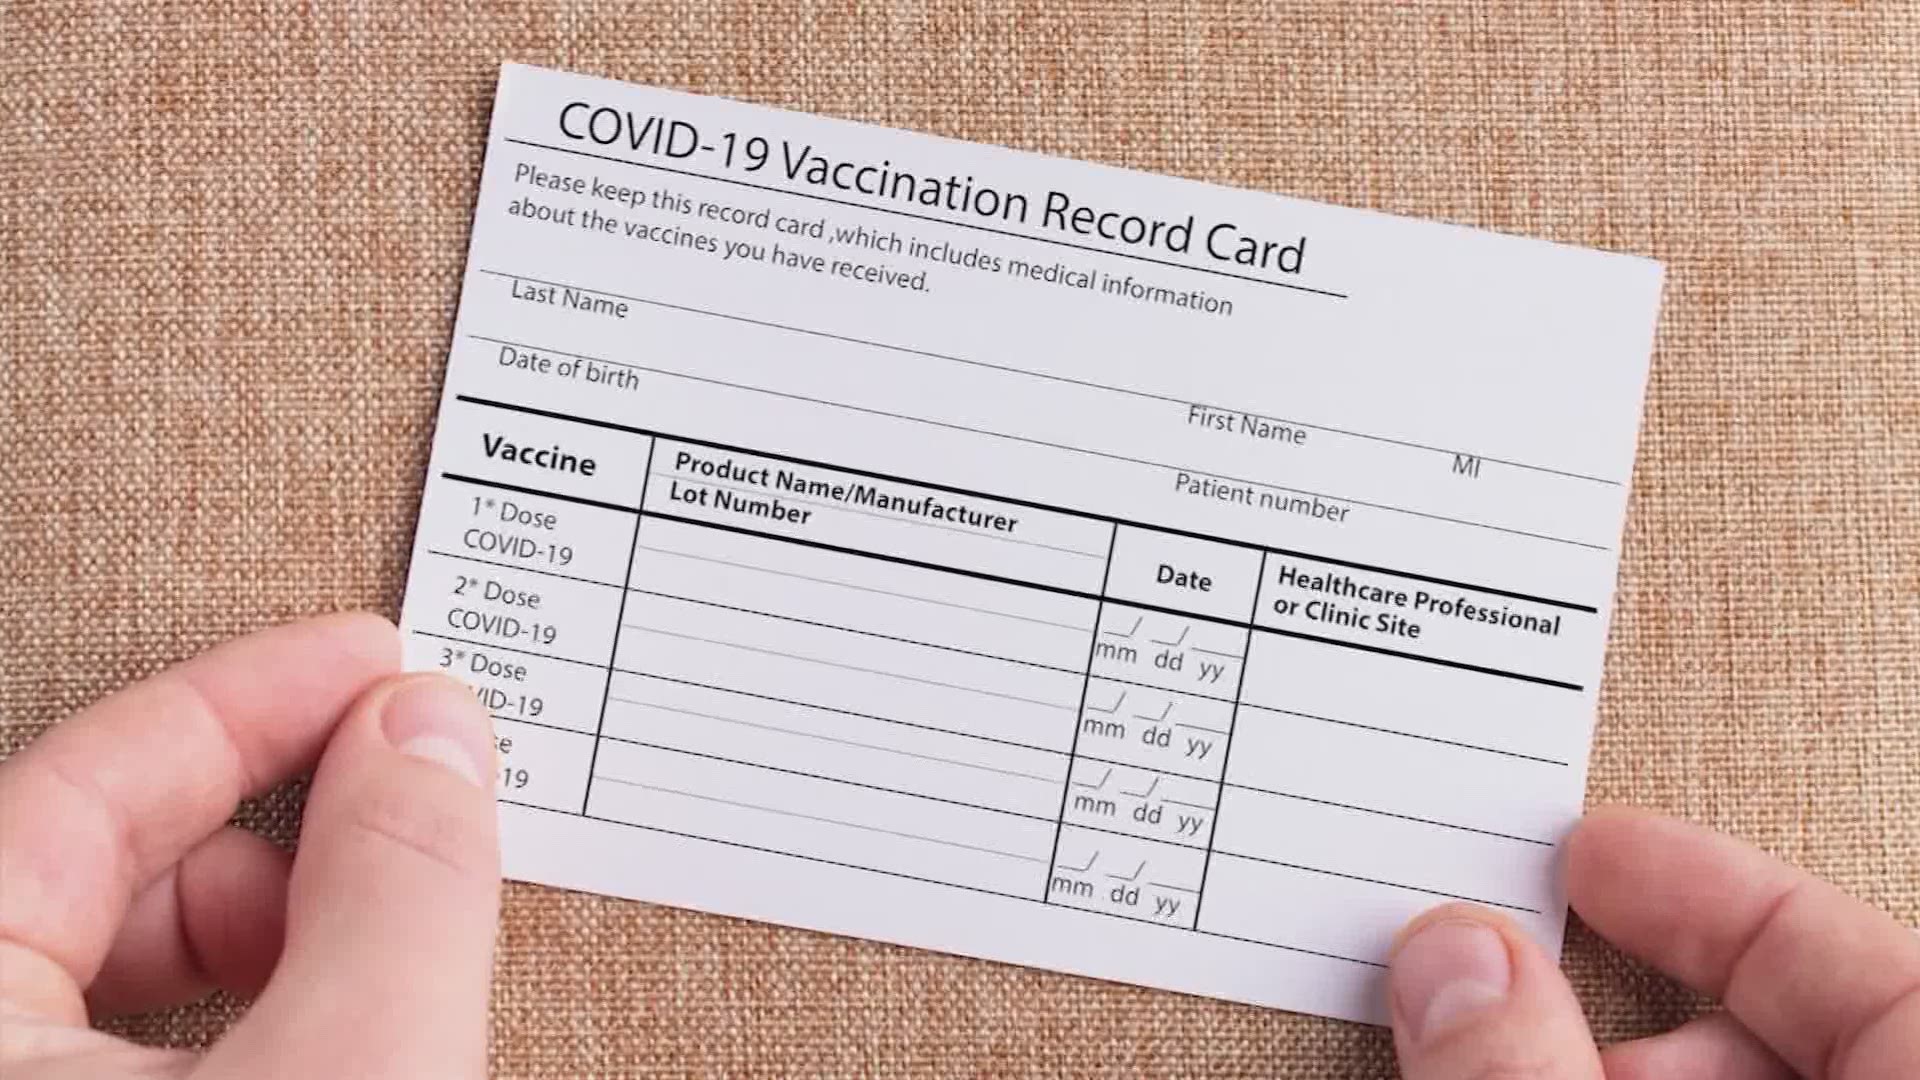 KHOU 11's legal analyst says employers can ask your vaccination status to maintain a safe workplace.